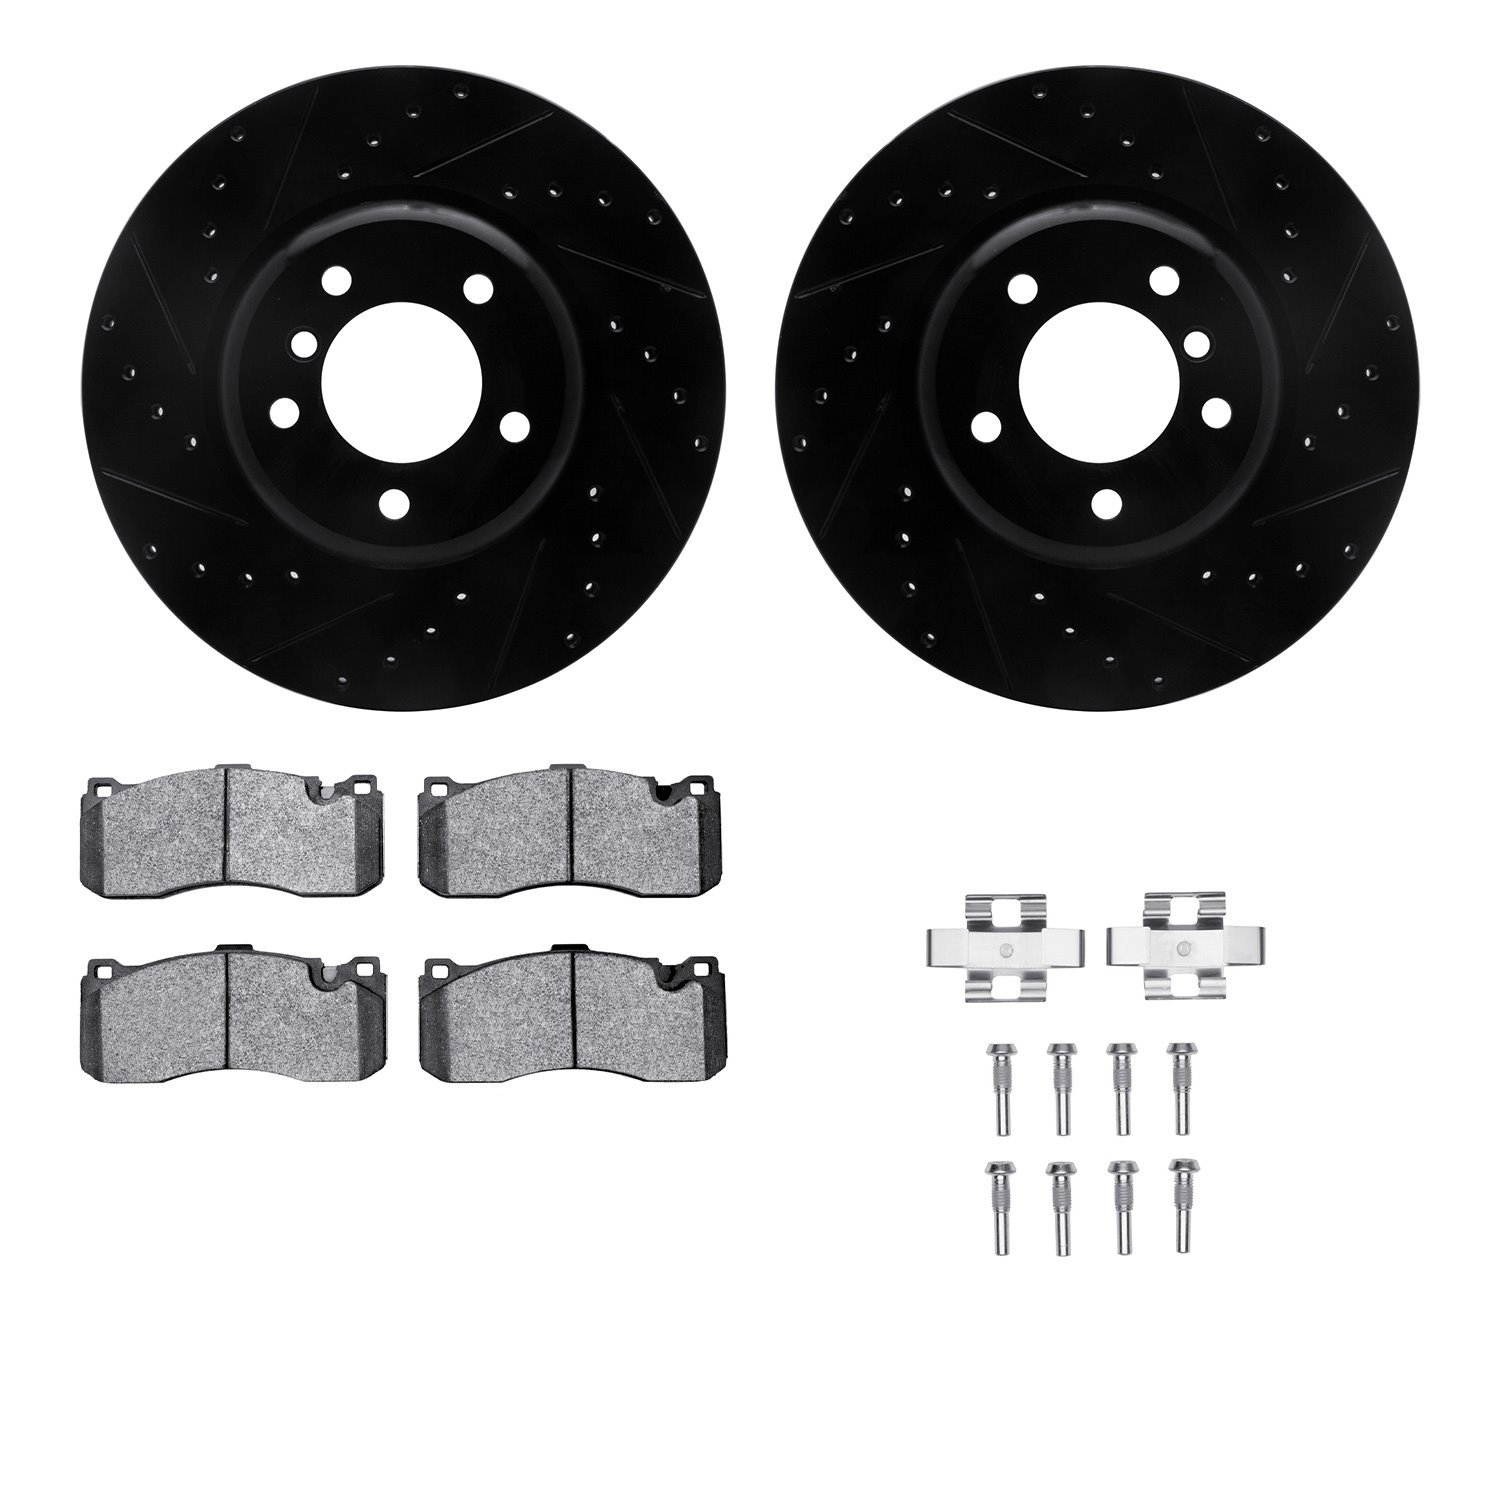 8312-31095 Drilled/Slotted Brake Rotors with 3000-Series Ceramic Brake Pads Kit & Hardware [Black], 2006-2013 BMW, Position: Fro